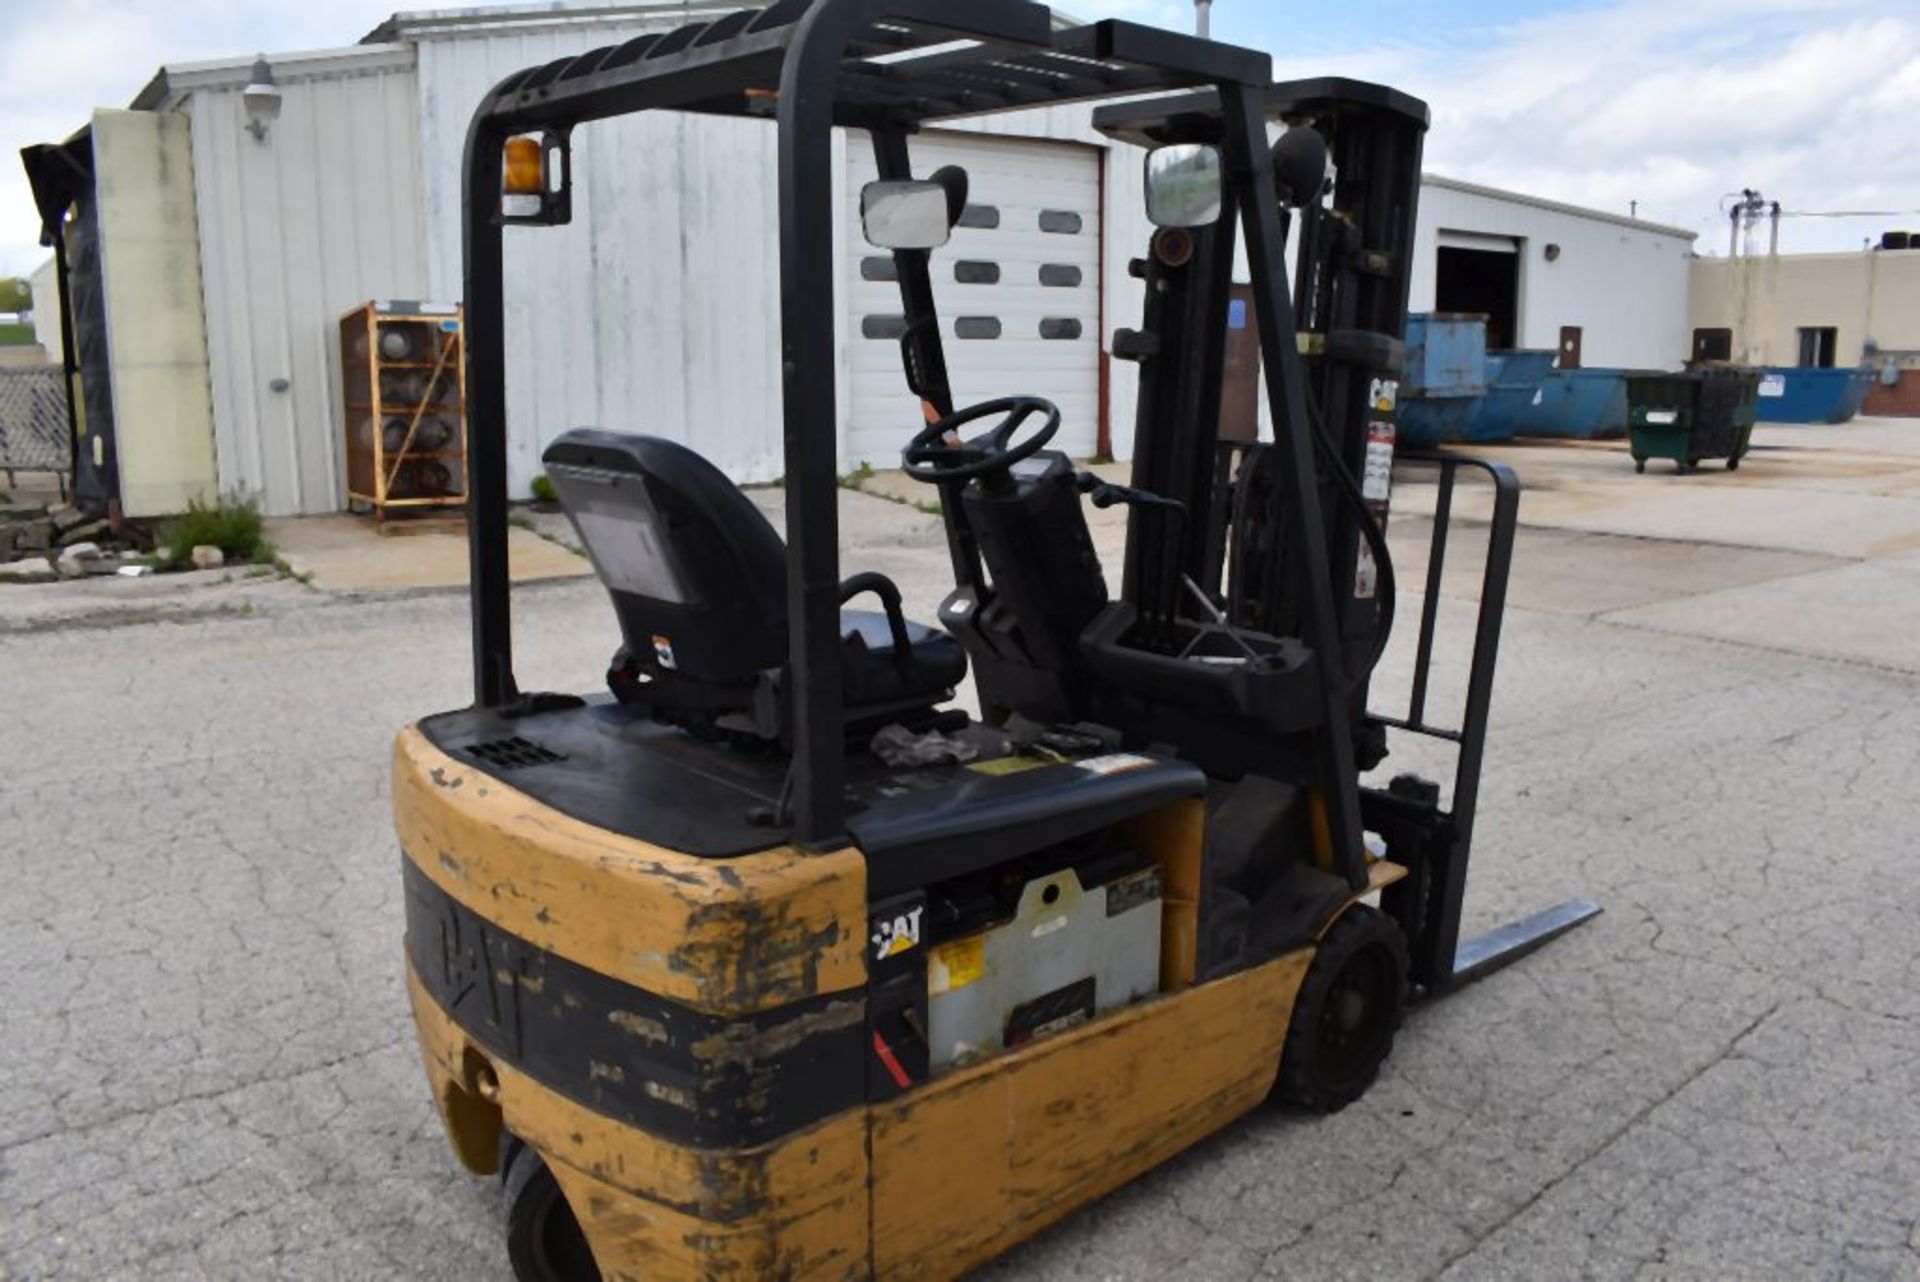 CATERPILLAR RIDE ON FORK TRUCK, MODEL ET3500-AC, S/N: ETB1400111, 36V ELECTRIC TYPE WITH CHARGER, - Image 3 of 8